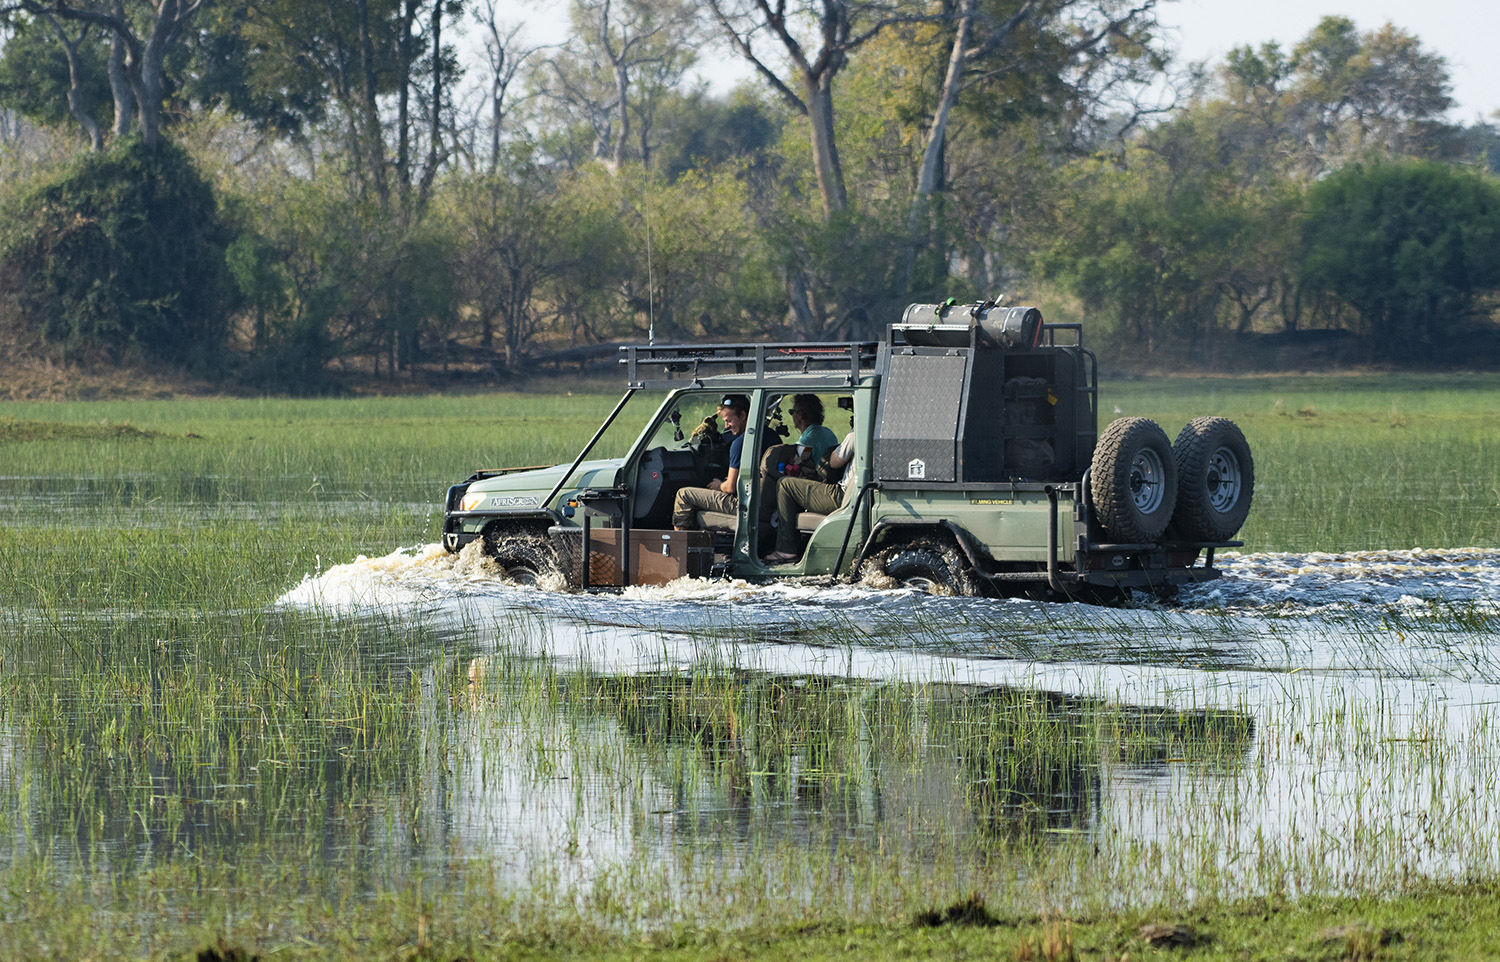 4-wheel drive carrying Bertie Gregory and crew driving through the water.